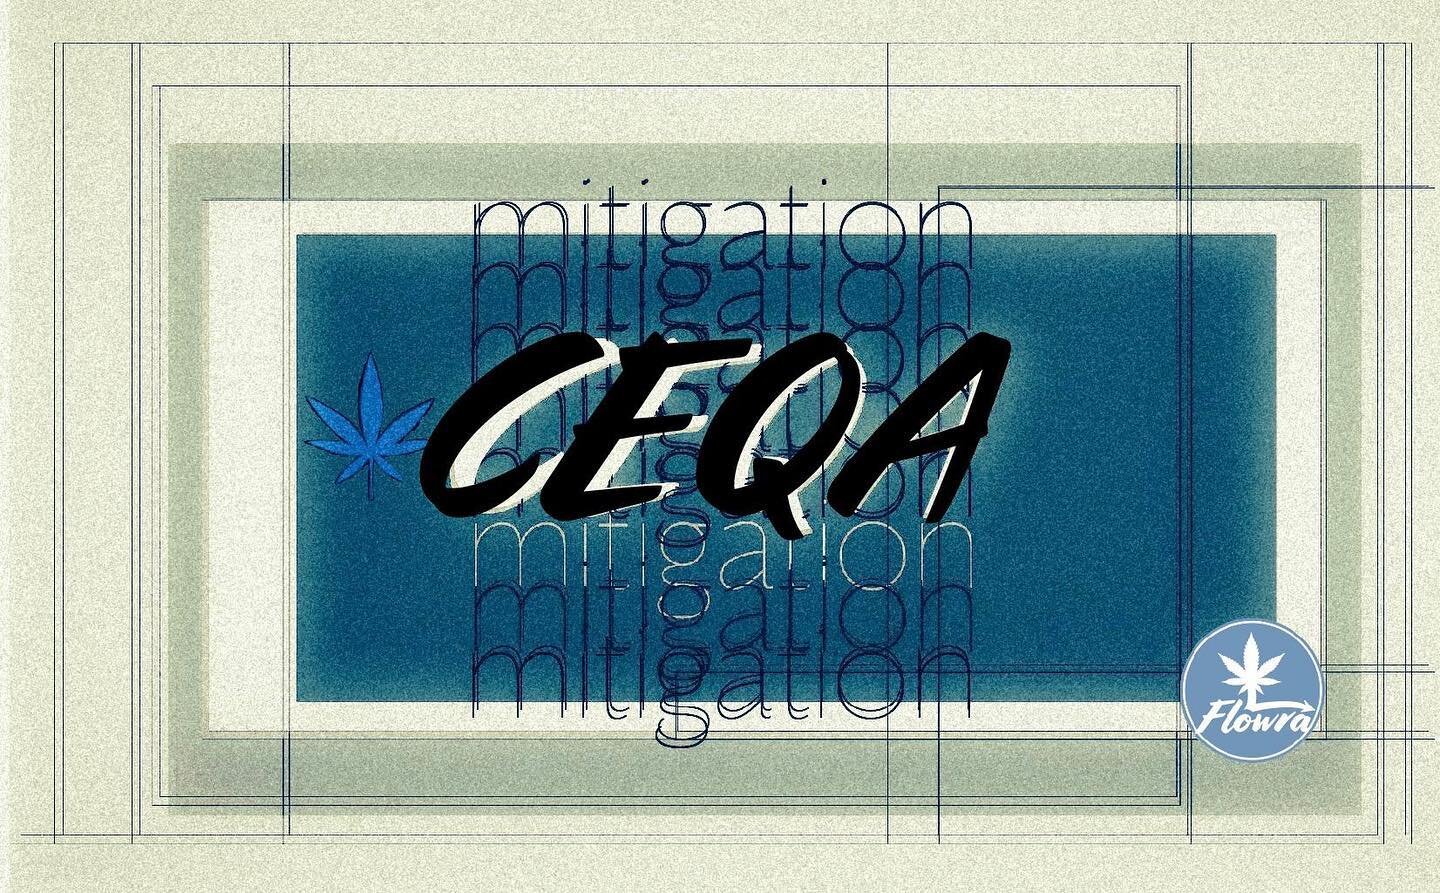 Drowning in the CEQA? Let Flowra keep you afloat with your site specific mitigations and help you navigate towards full compliance. Trinity County and beyond. Grow with the Flow! Details in bio. #ceqa #cannabiscommunity #cannabiz #trinitycounty